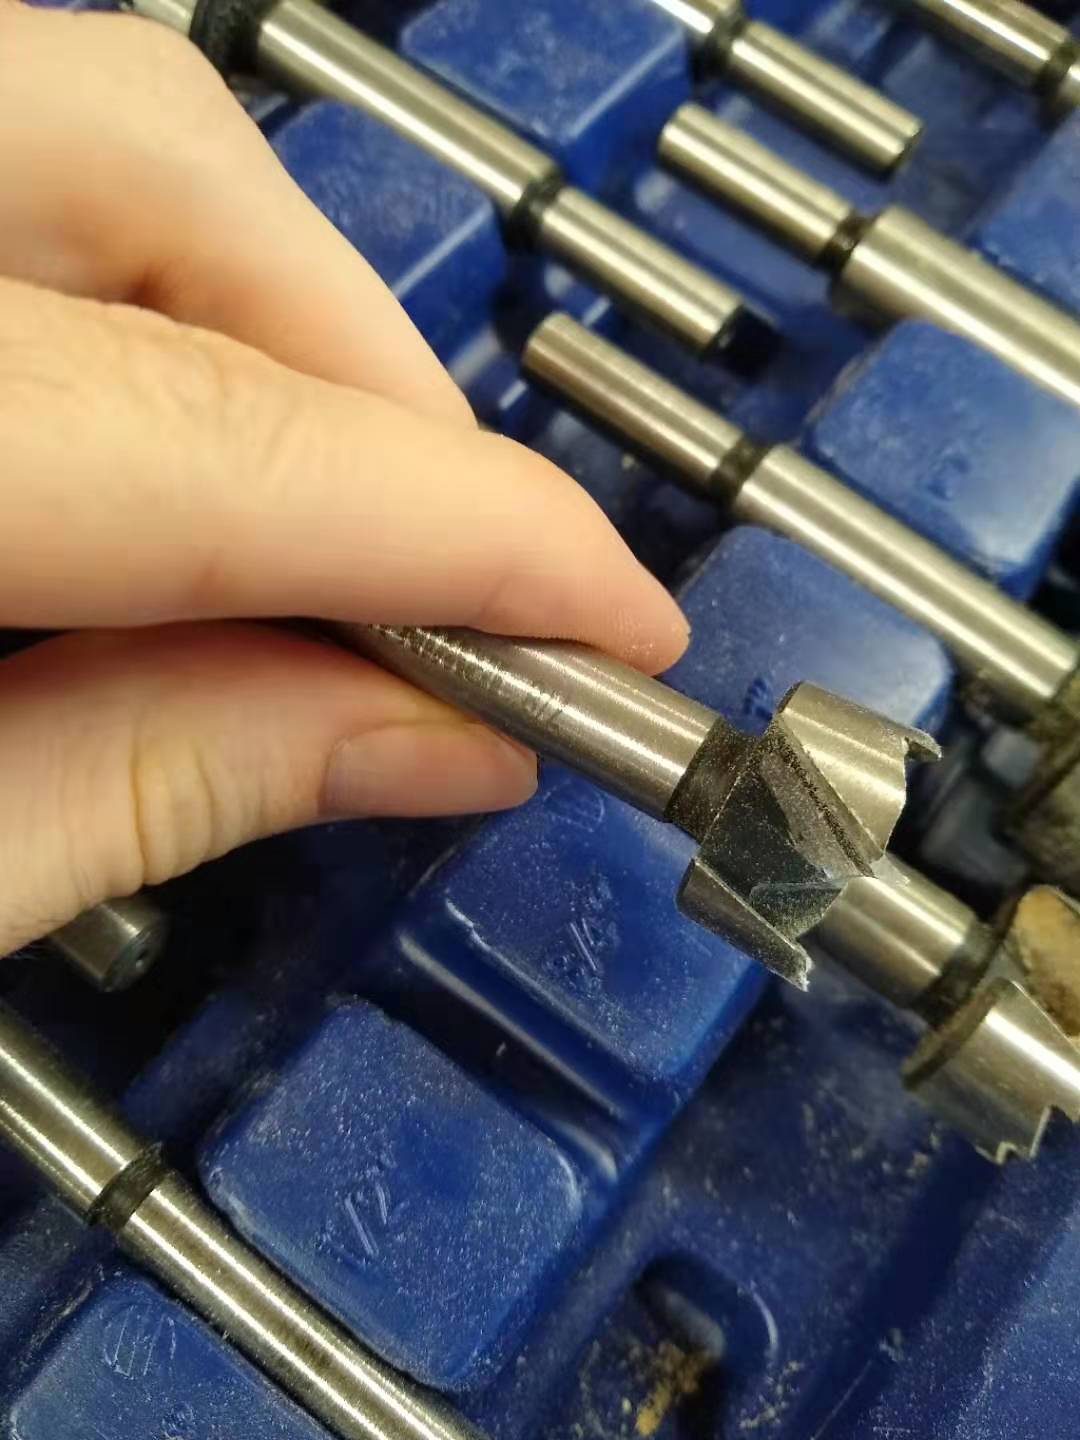 A picture of the drill bit used for my eyes.